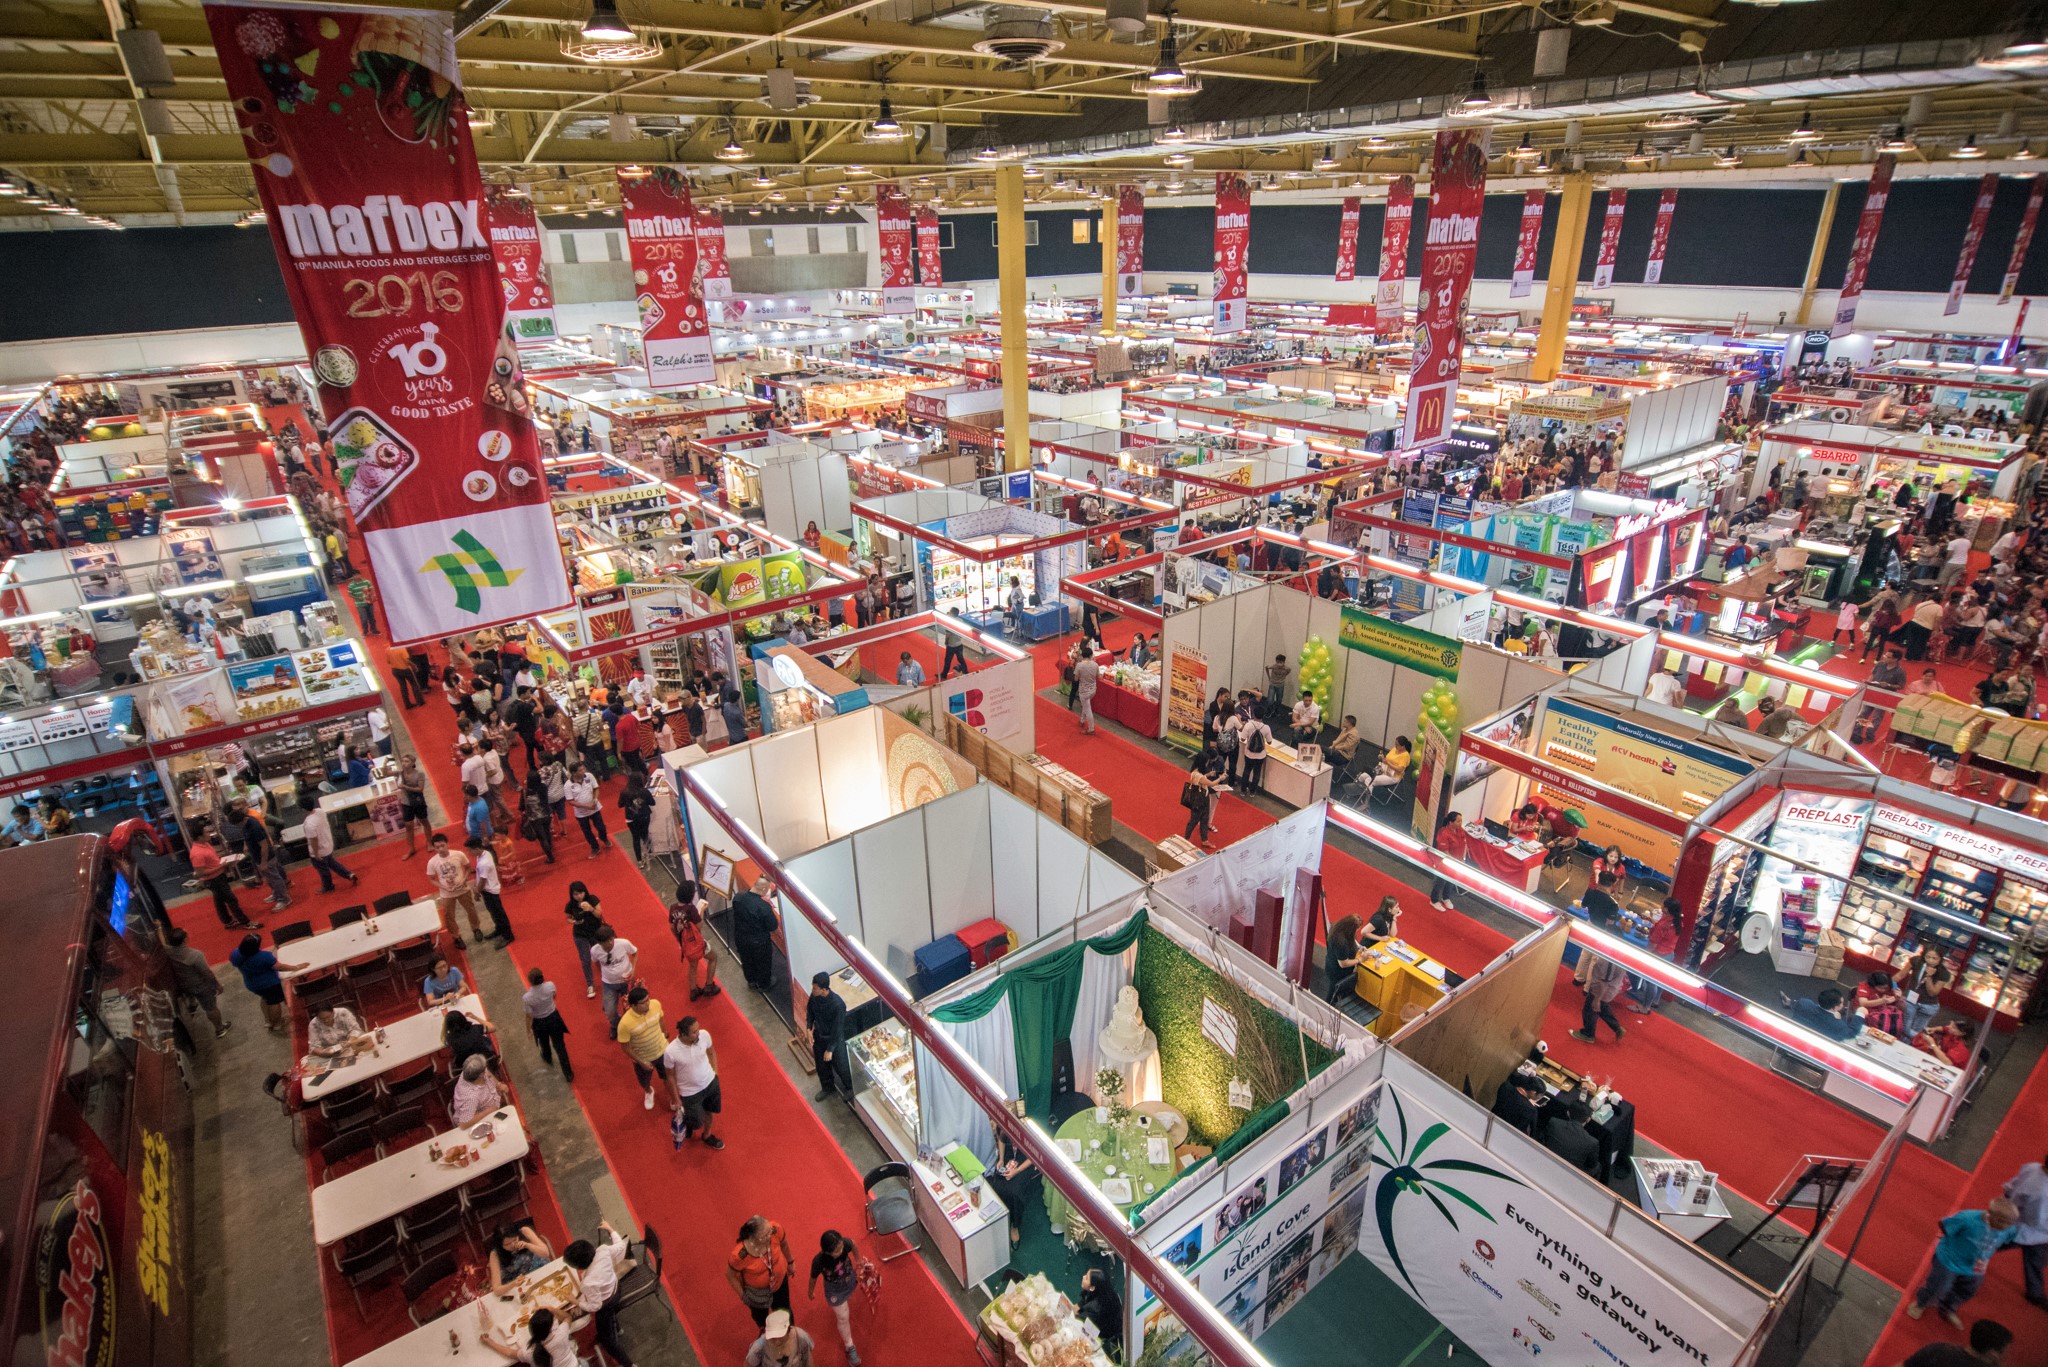 Expect a food adventure at this F&B expo's 12th edition F&B Report